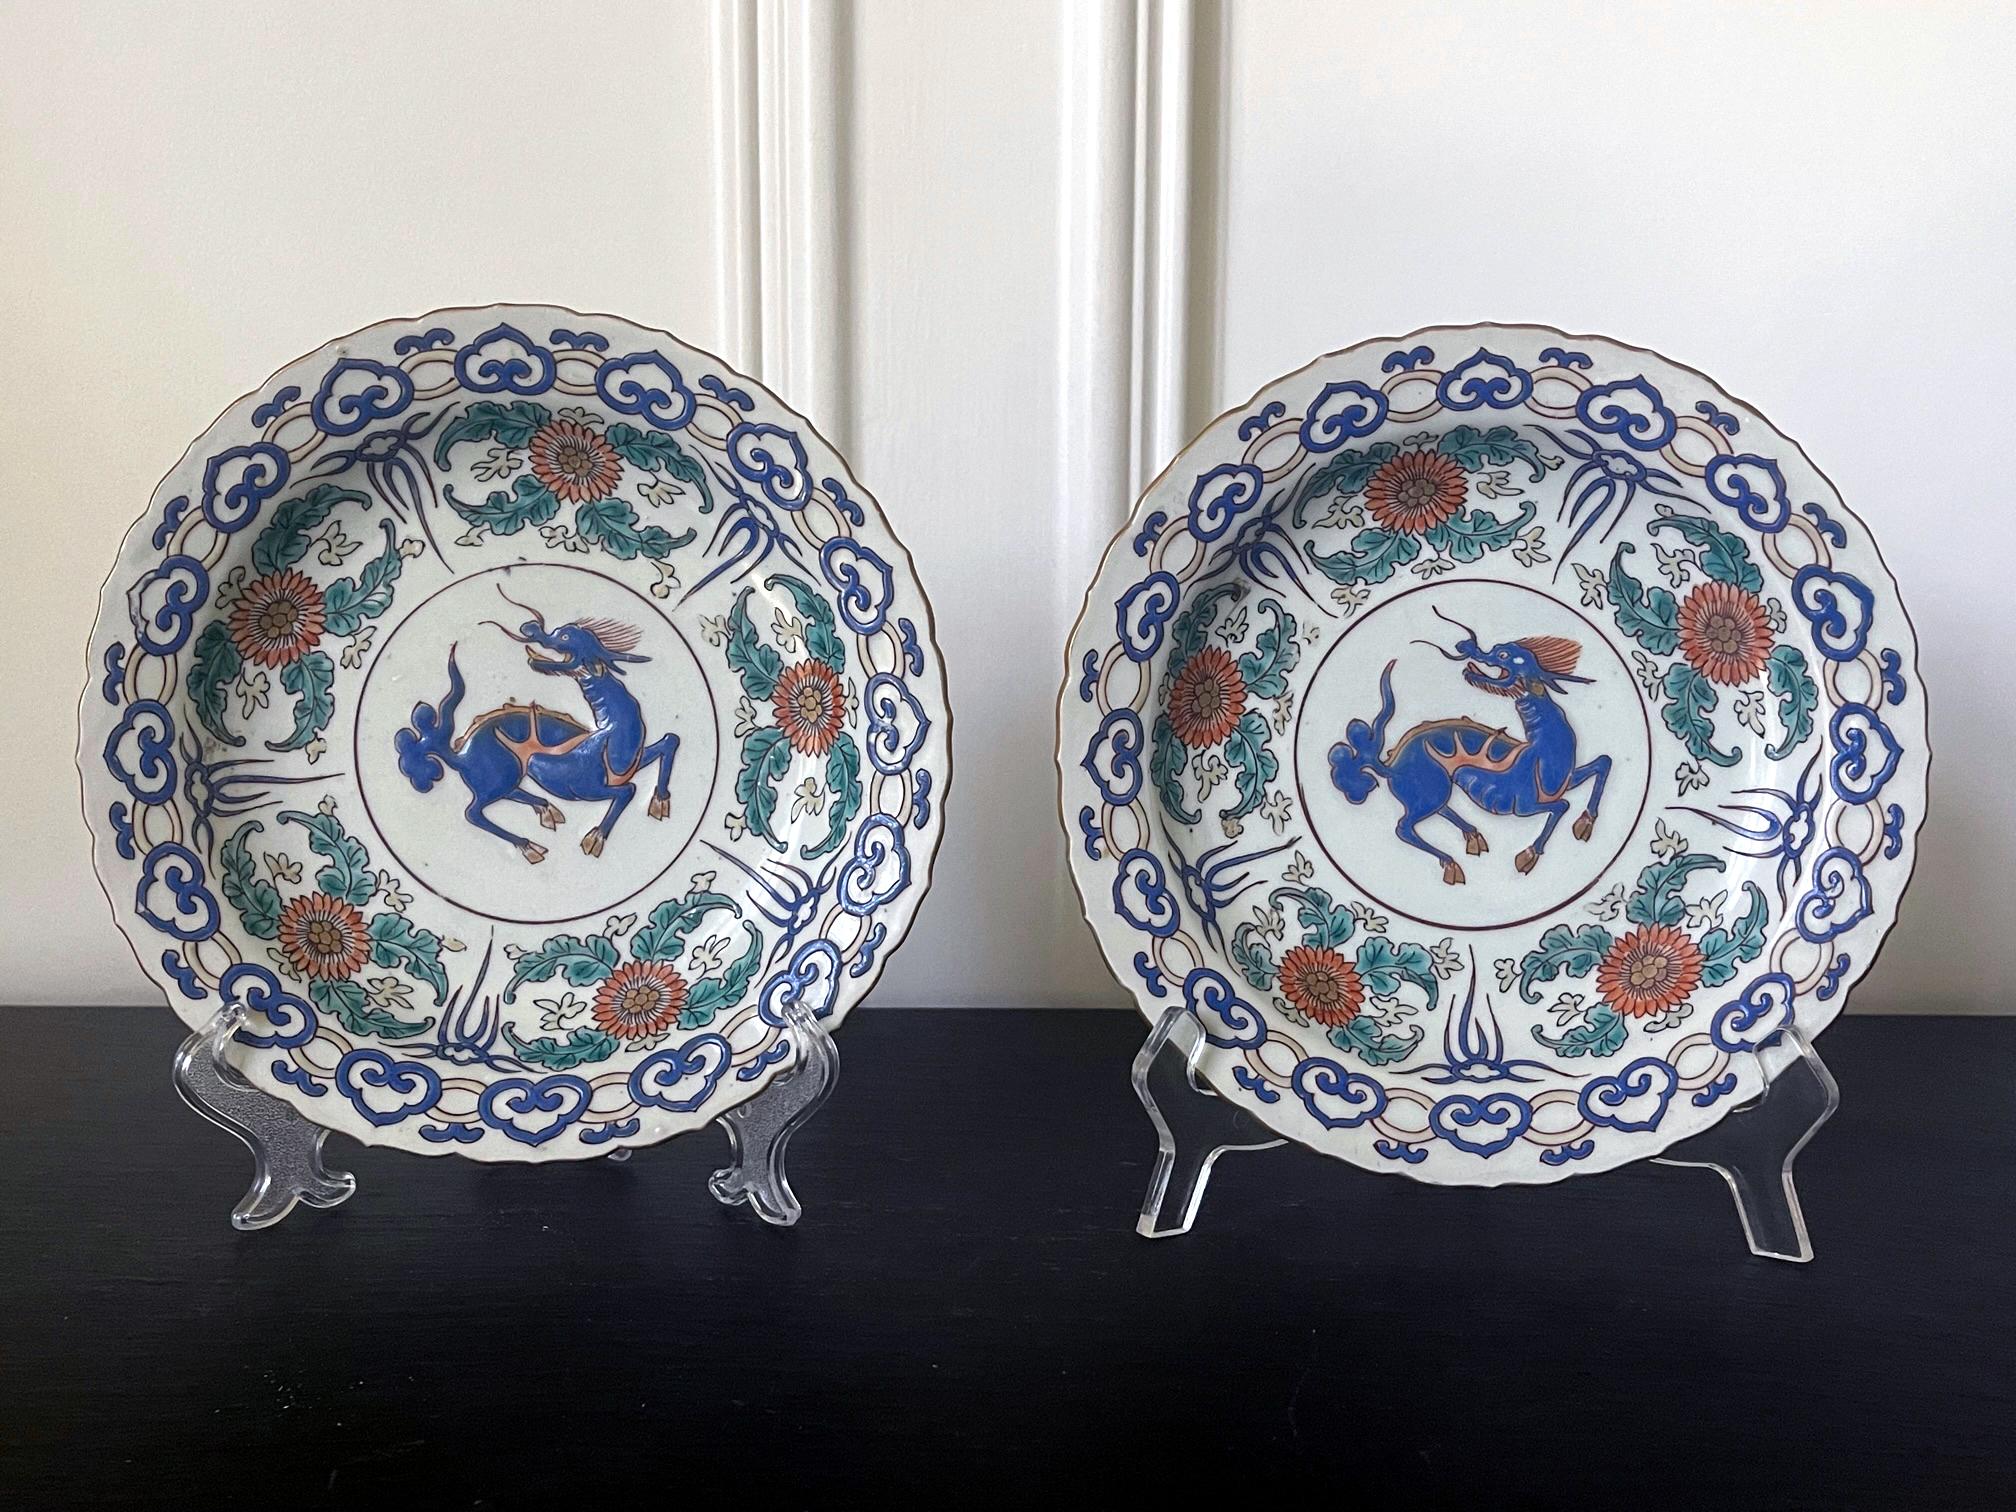 A pair of Japanese decorative ceramic plates, made in Arita for export market circa 17-18th century. The cabinet-display dishes feature lotus-petal gilt rim and a lavish tricolor enemal glaze decoration on a grey-white background. The center